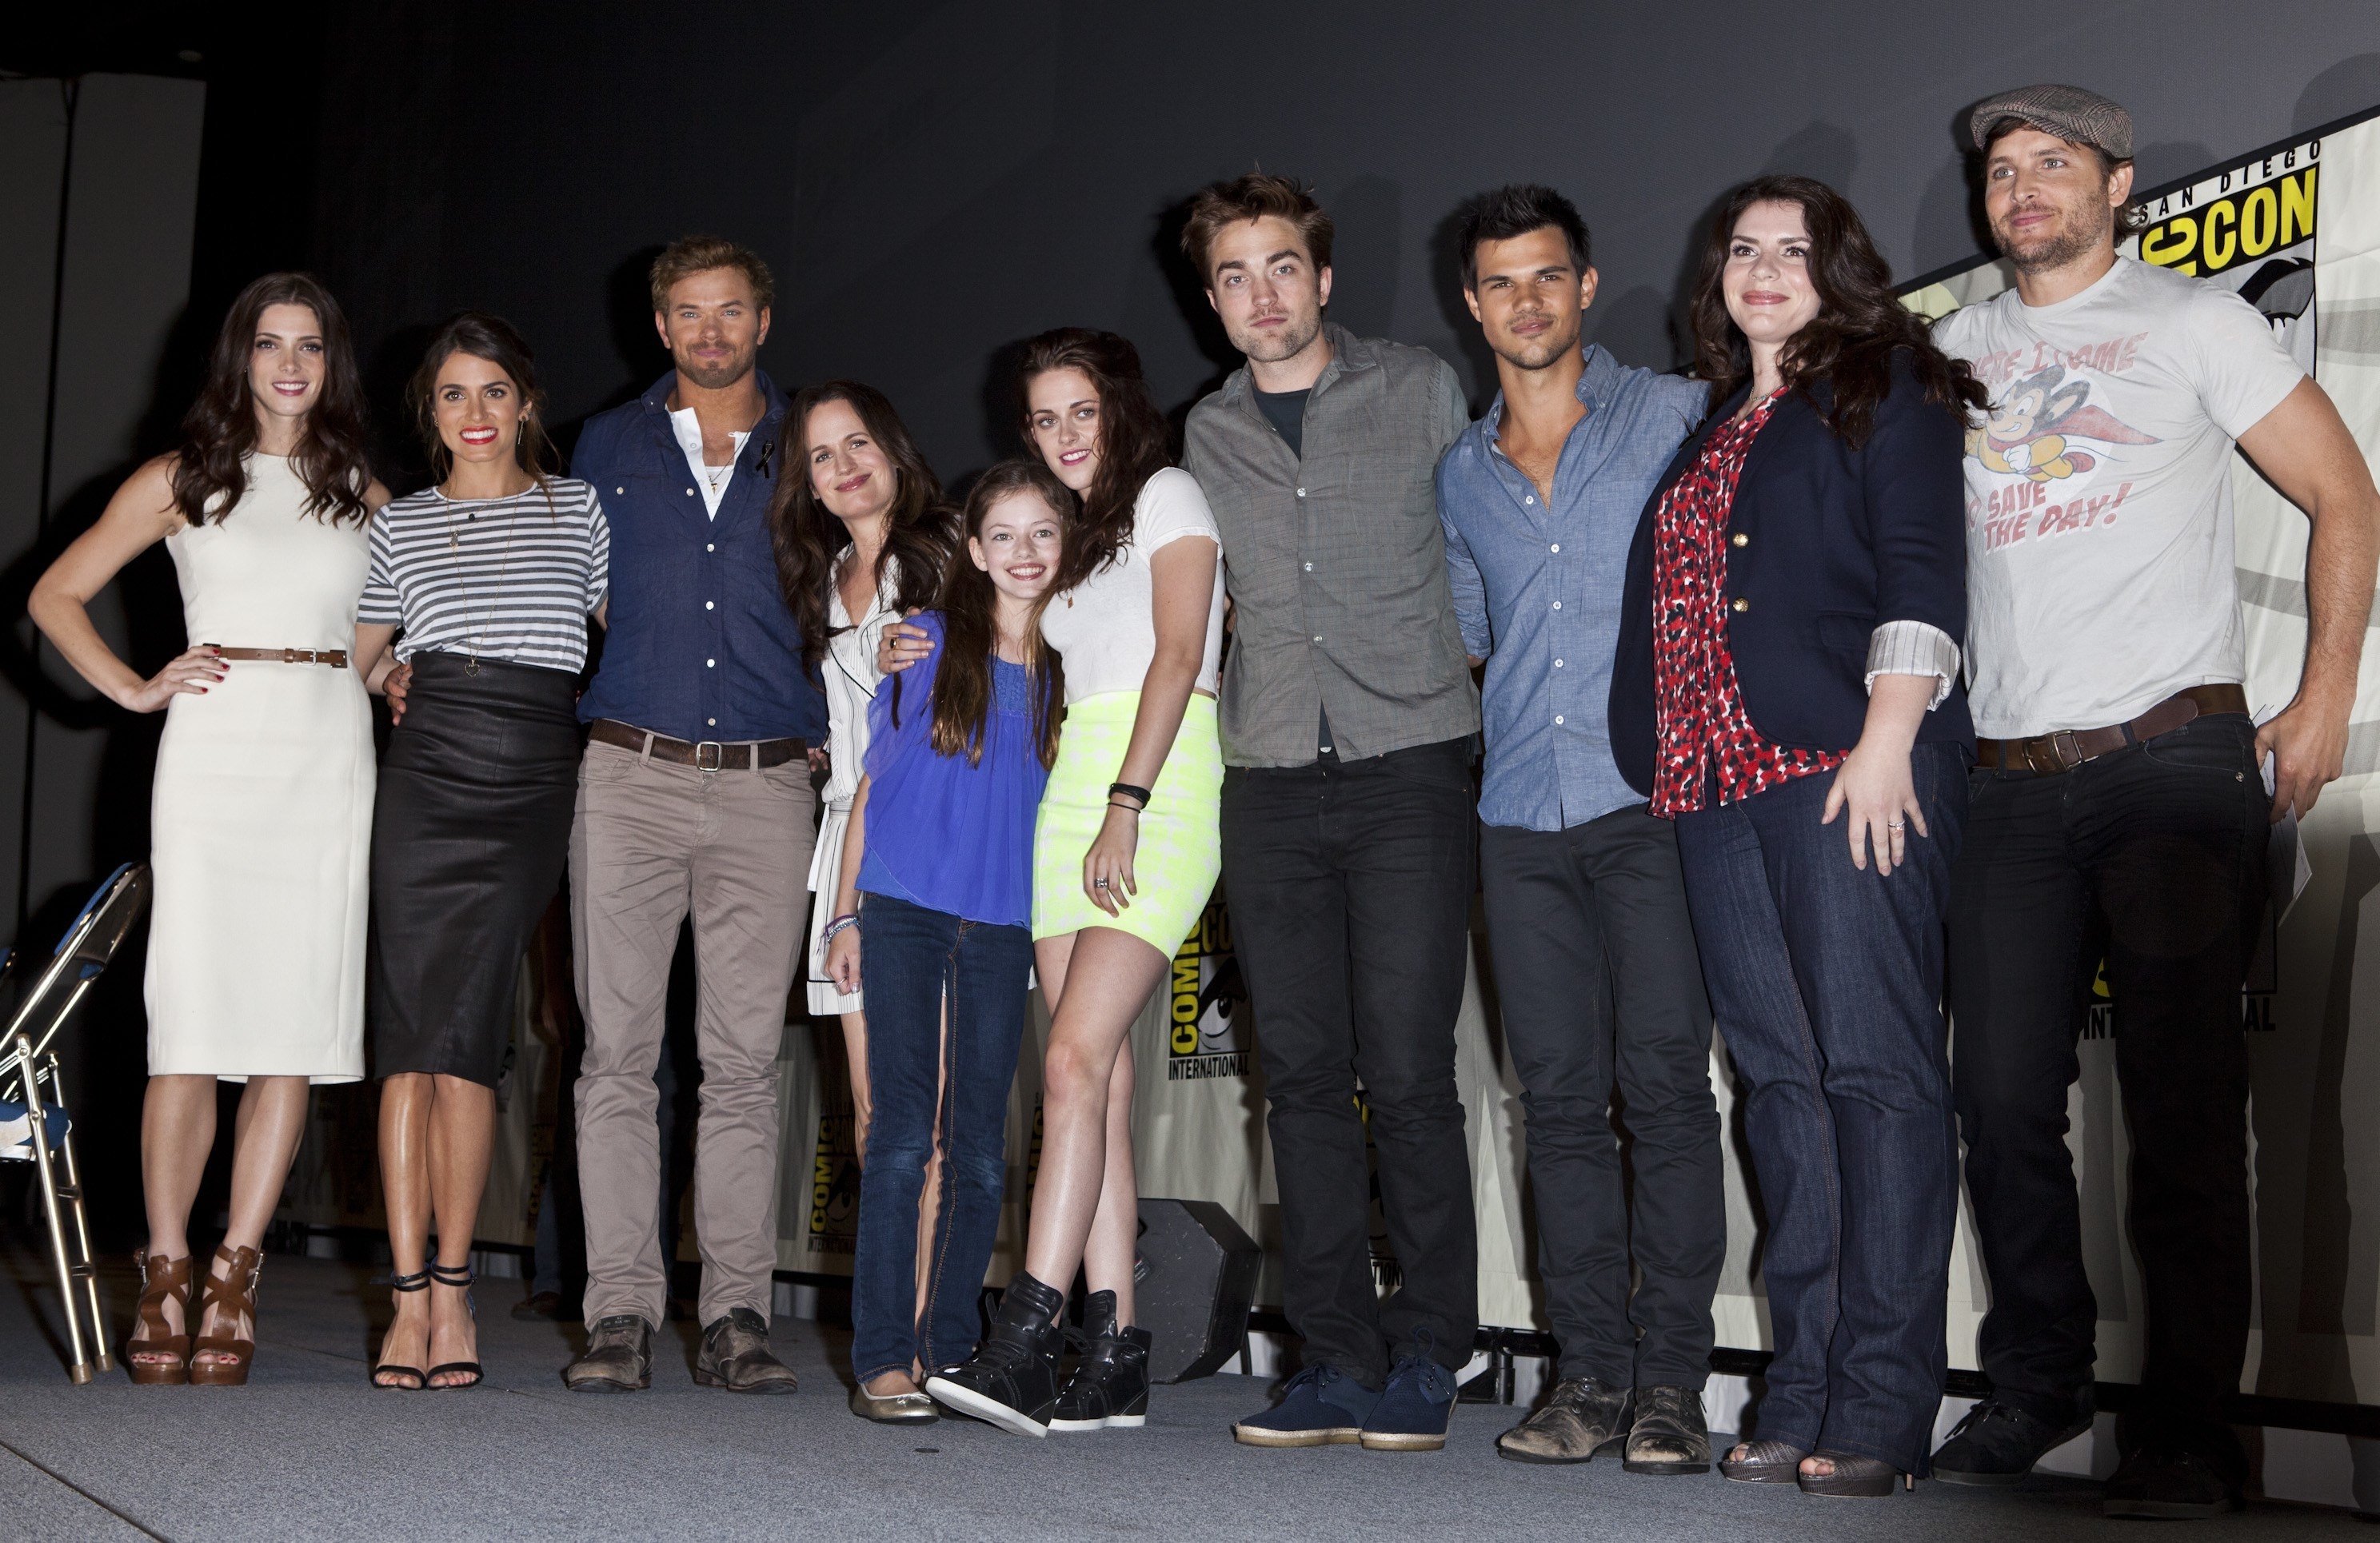 The cast poses together on stage